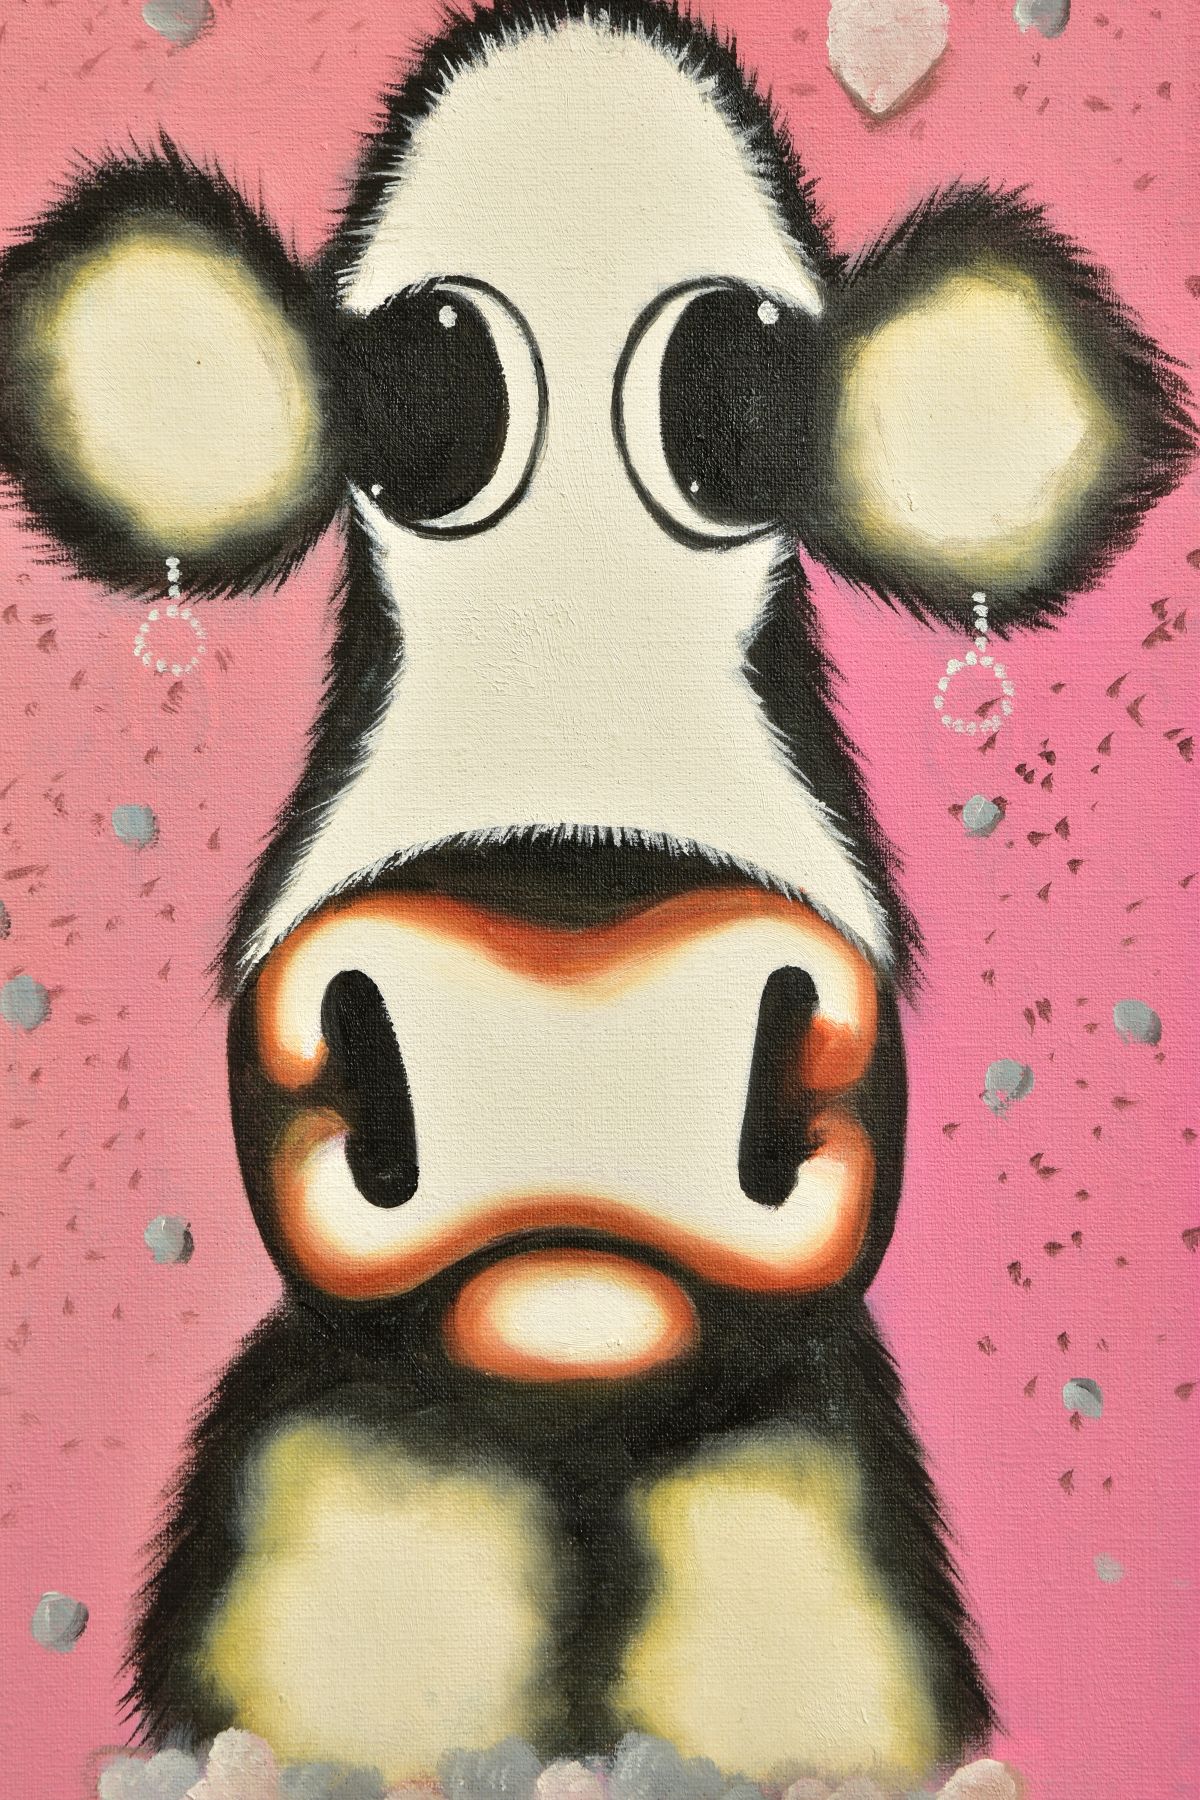 IN THE STYLE OF CAROLINE SHOTTON (BRITISH 1973) three quirky cows wearing earrings, unsigned, oil on - Image 3 of 7